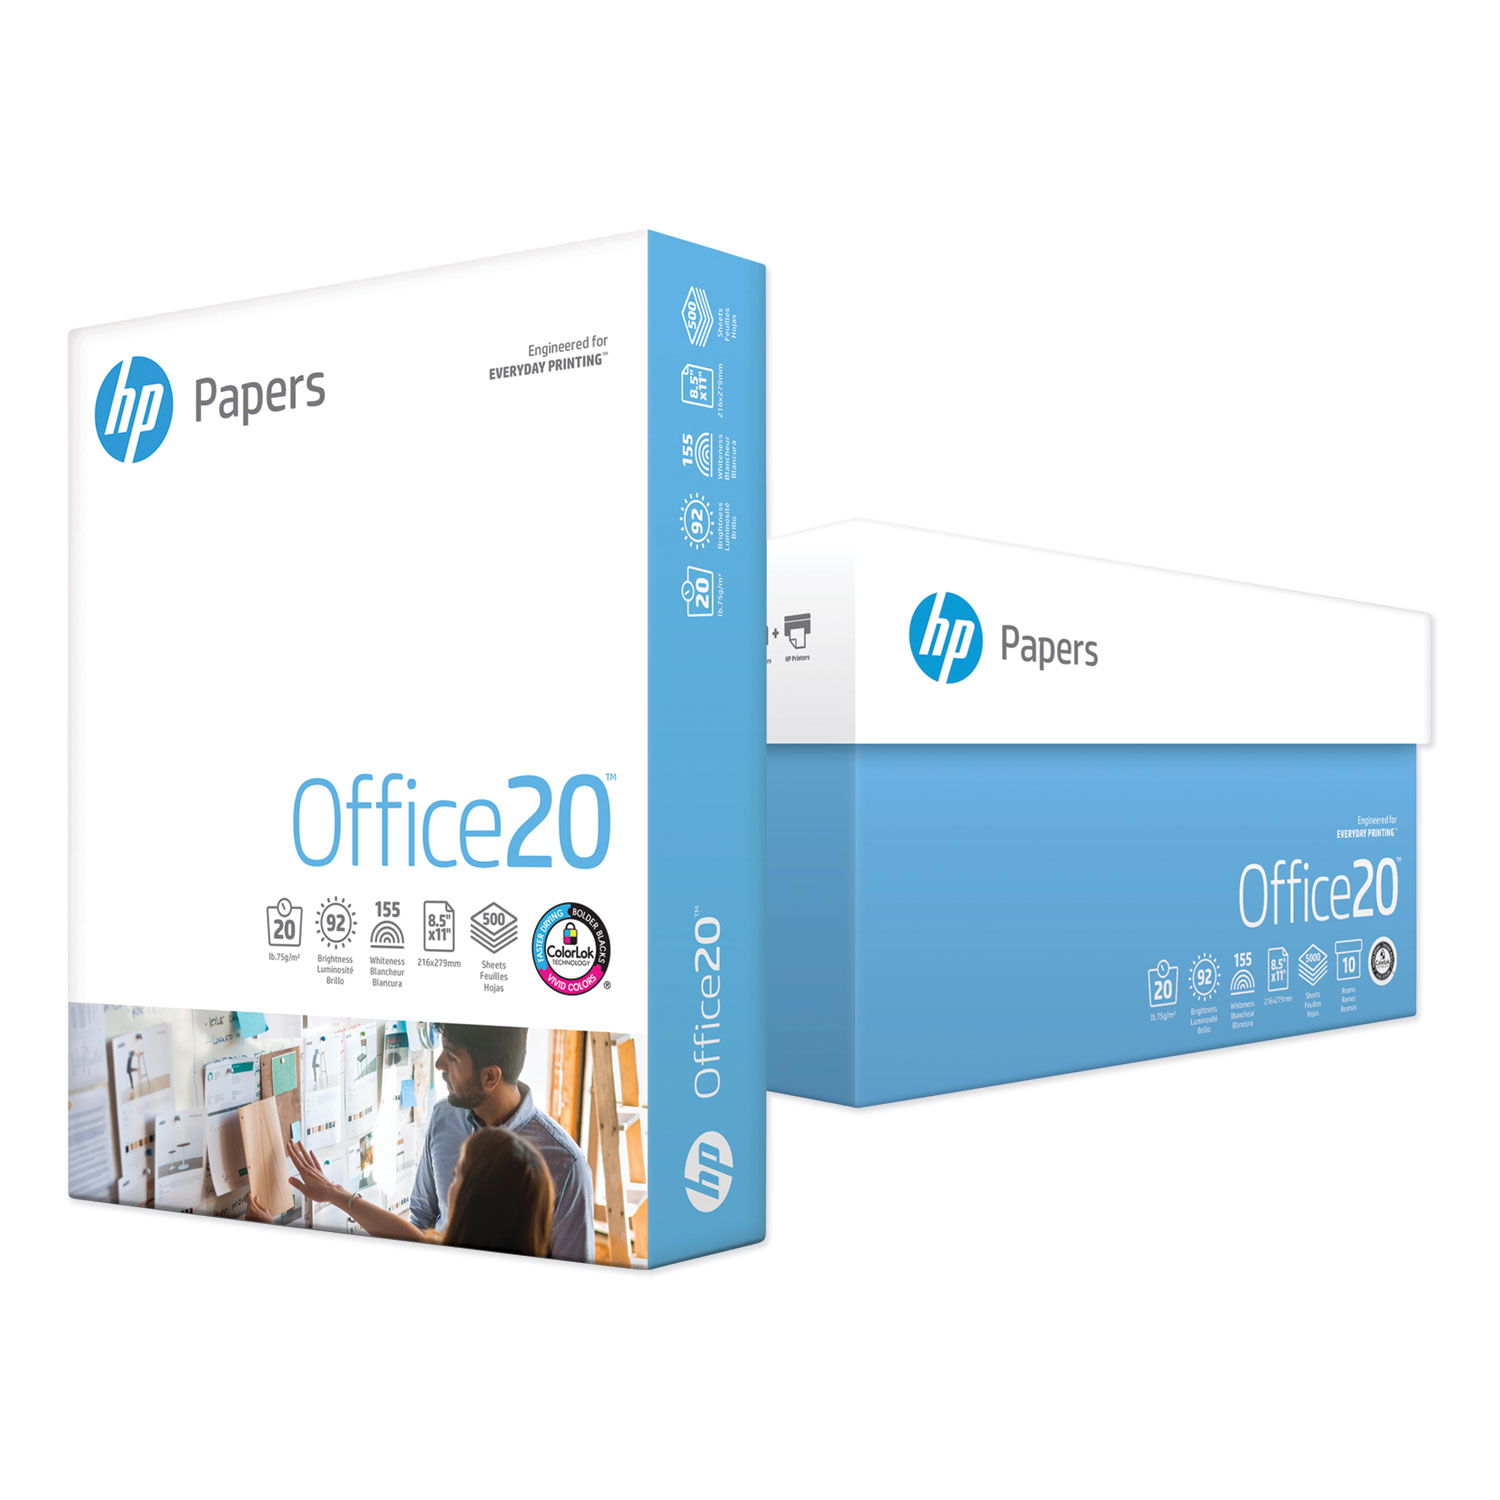 HP Office Recycled Paper, 92 Brightness, 20lb, 8-1/2 x 11, White